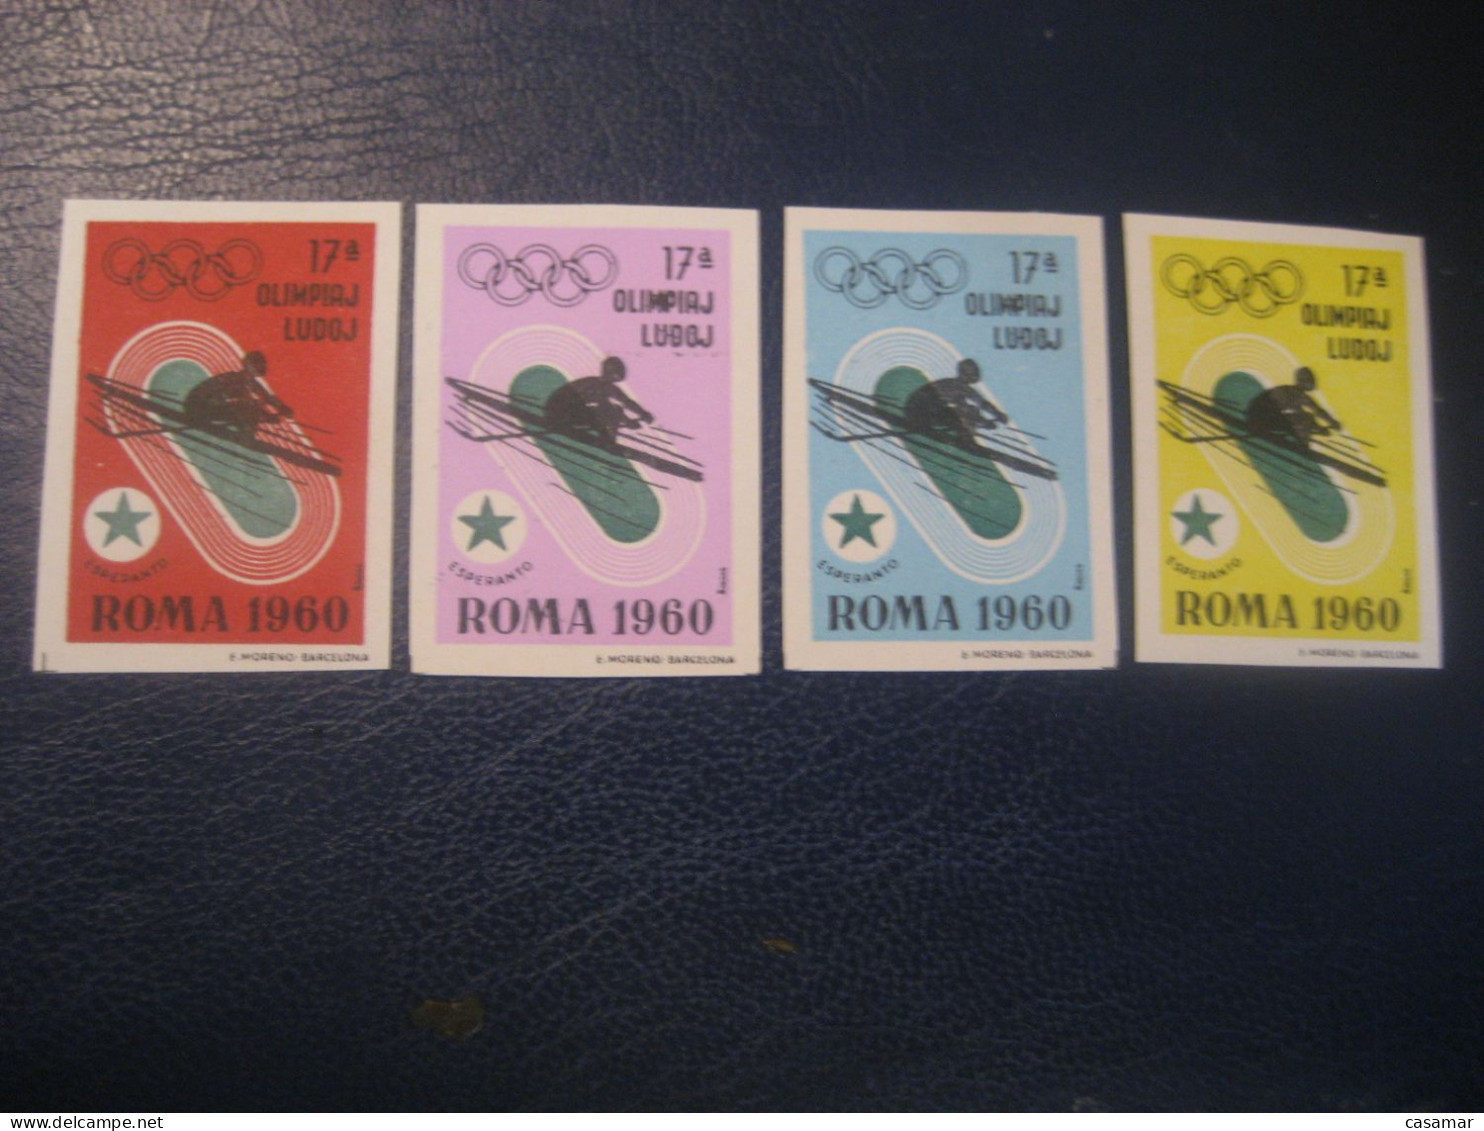 ROMA 1960 Rowing Aviron Olympic Games Olympics Esperanto 4 Imperforated Poster Stamp Vignette ITALY Spain Label - Aviron